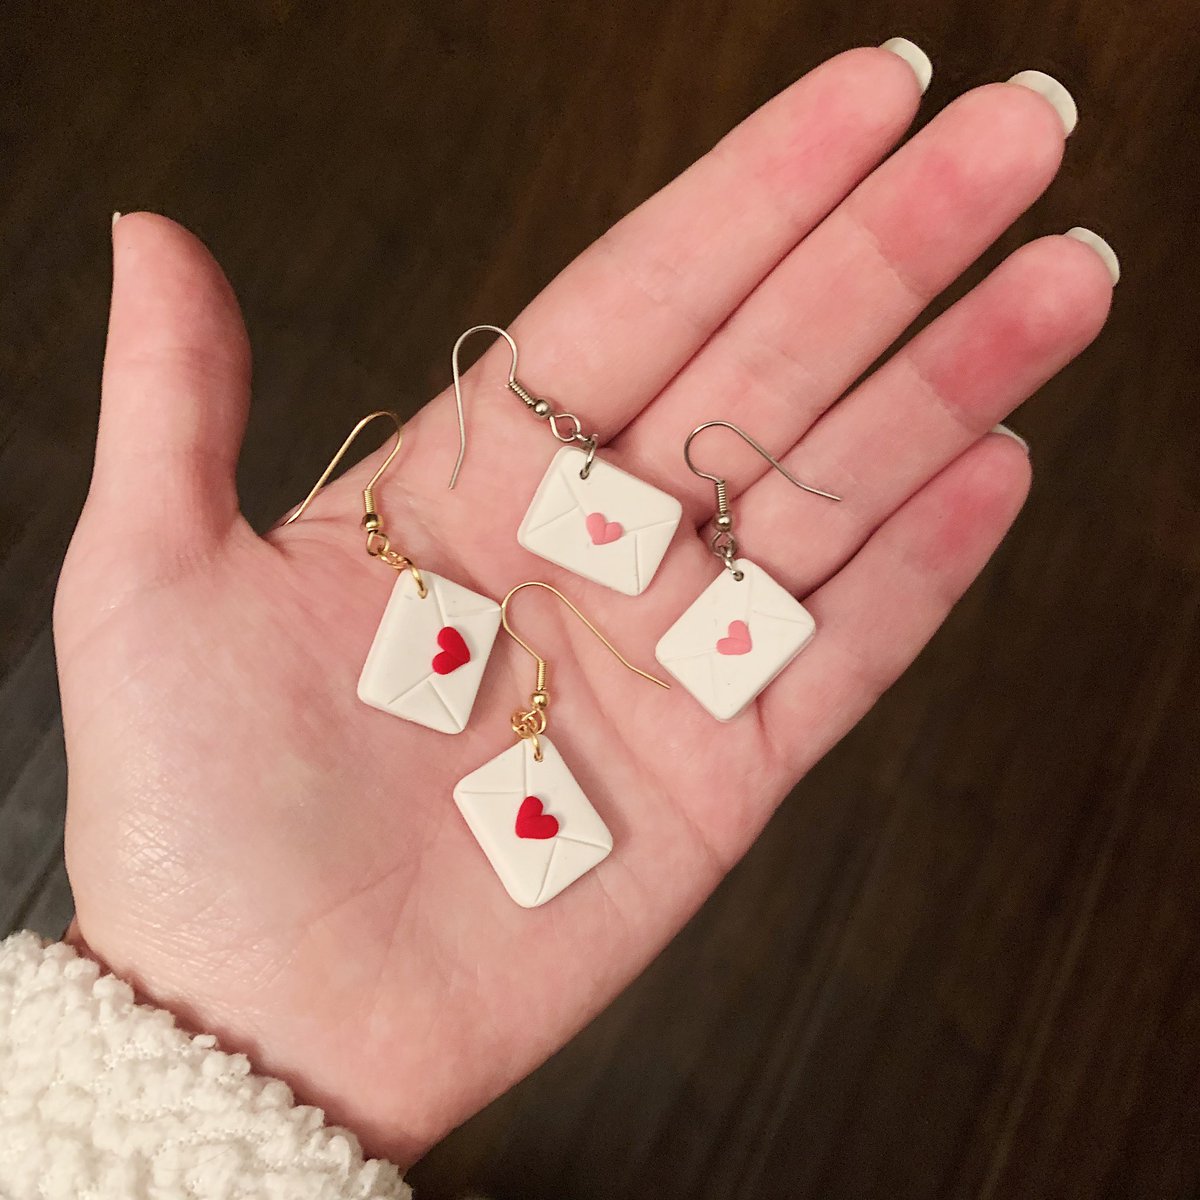 hi hello, i’m ryan! i’m a 22 year old artist based in cali who makes polymer clay earrings~ i’ve got a shop update this friday at 11 am pst 